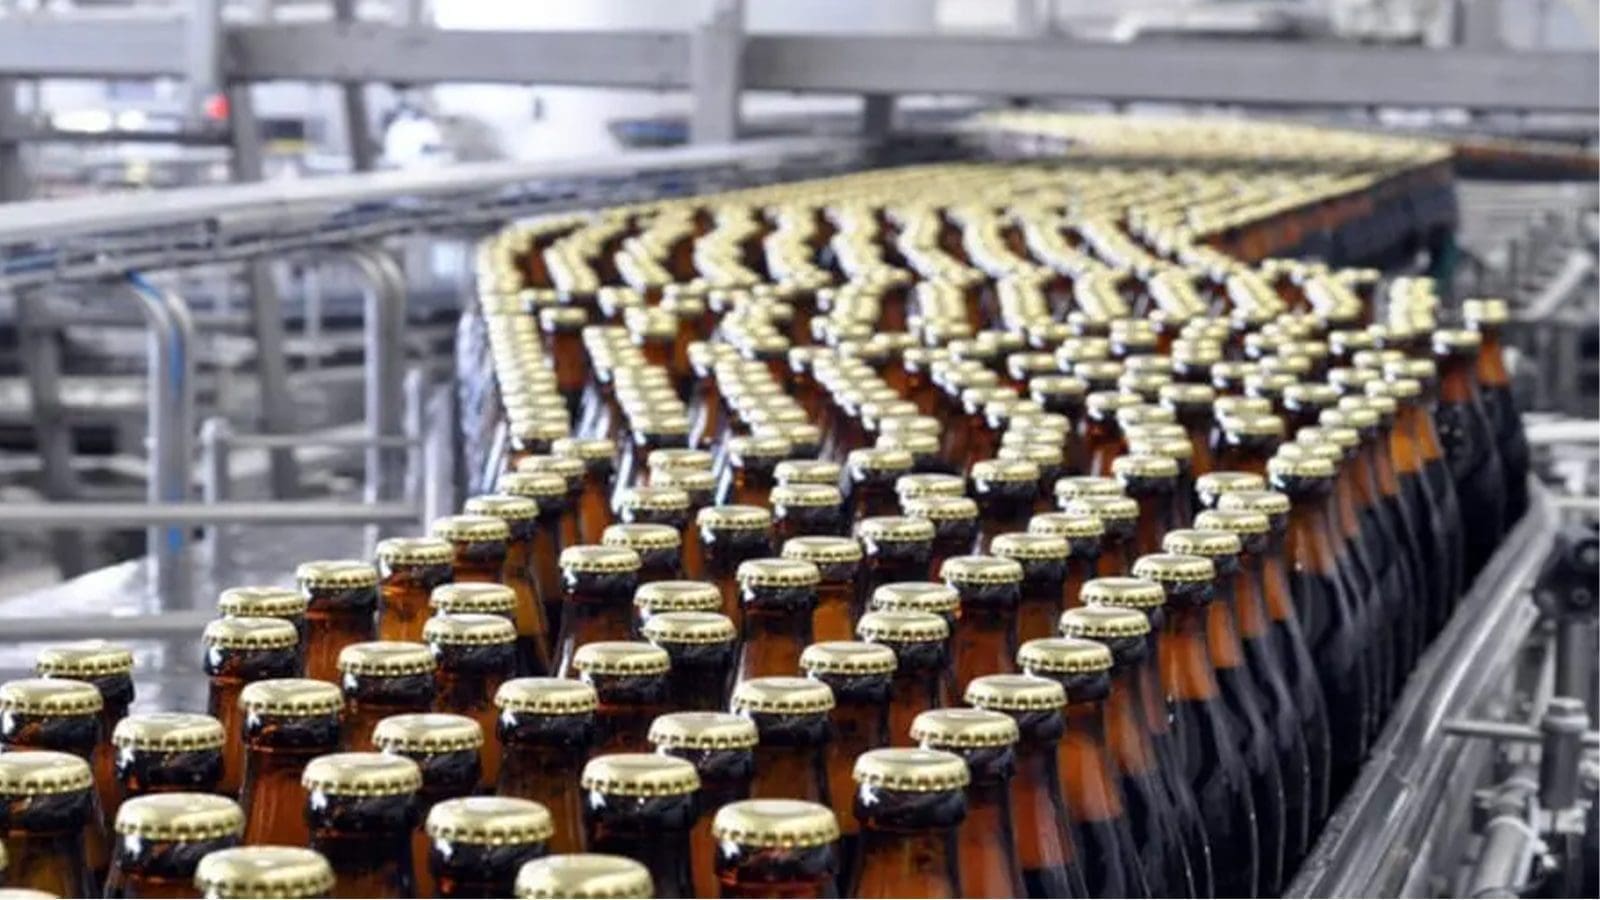 Government initiates beer-marking system to combat fraud, brewing companies express concerns